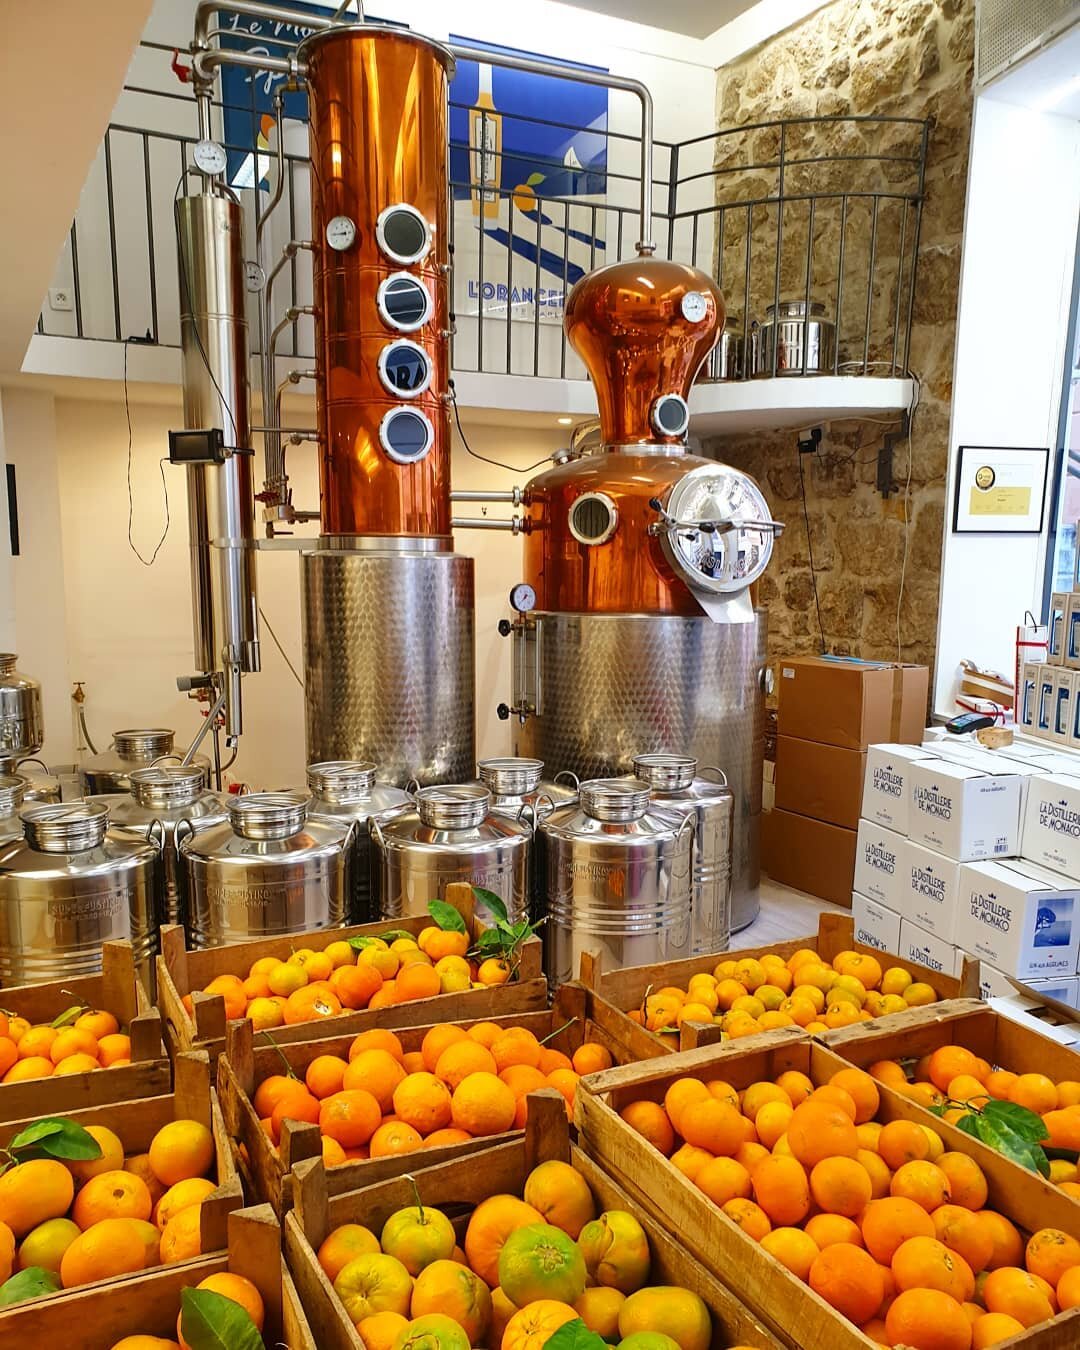 And we're off! The 2021 harvest has begun and the fruit is fresh, fragrant and looking pretty as...an orange! 
Stop in and visit us if you are in the area (with a mask and respecting social distancing) and take in the beautiful aroma from the product